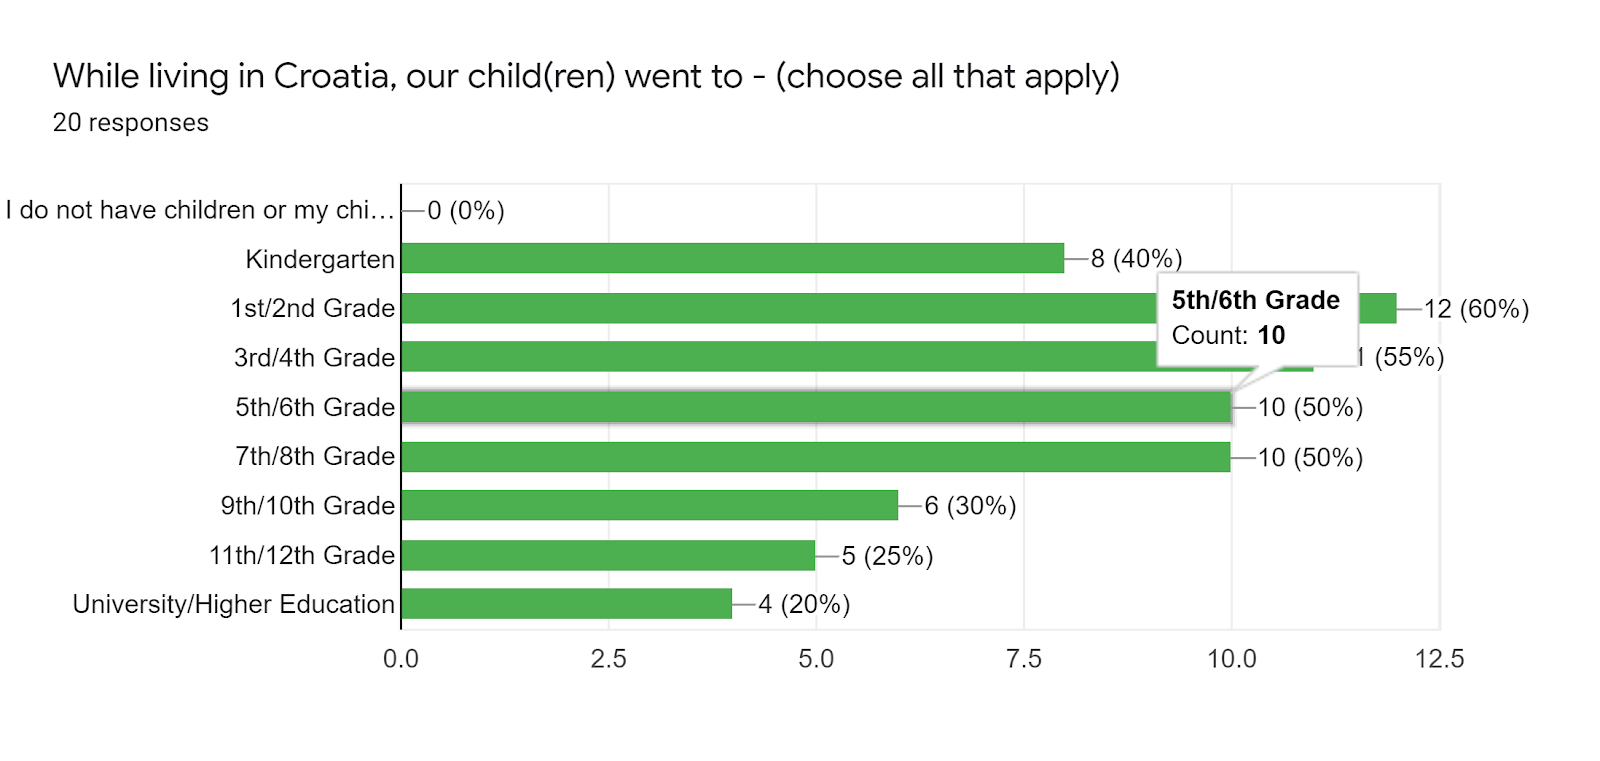 Forms response chart. Question title: While living in Croatia, our child(ren) went to - (choose all that apply). Number of responses: 20 responses.